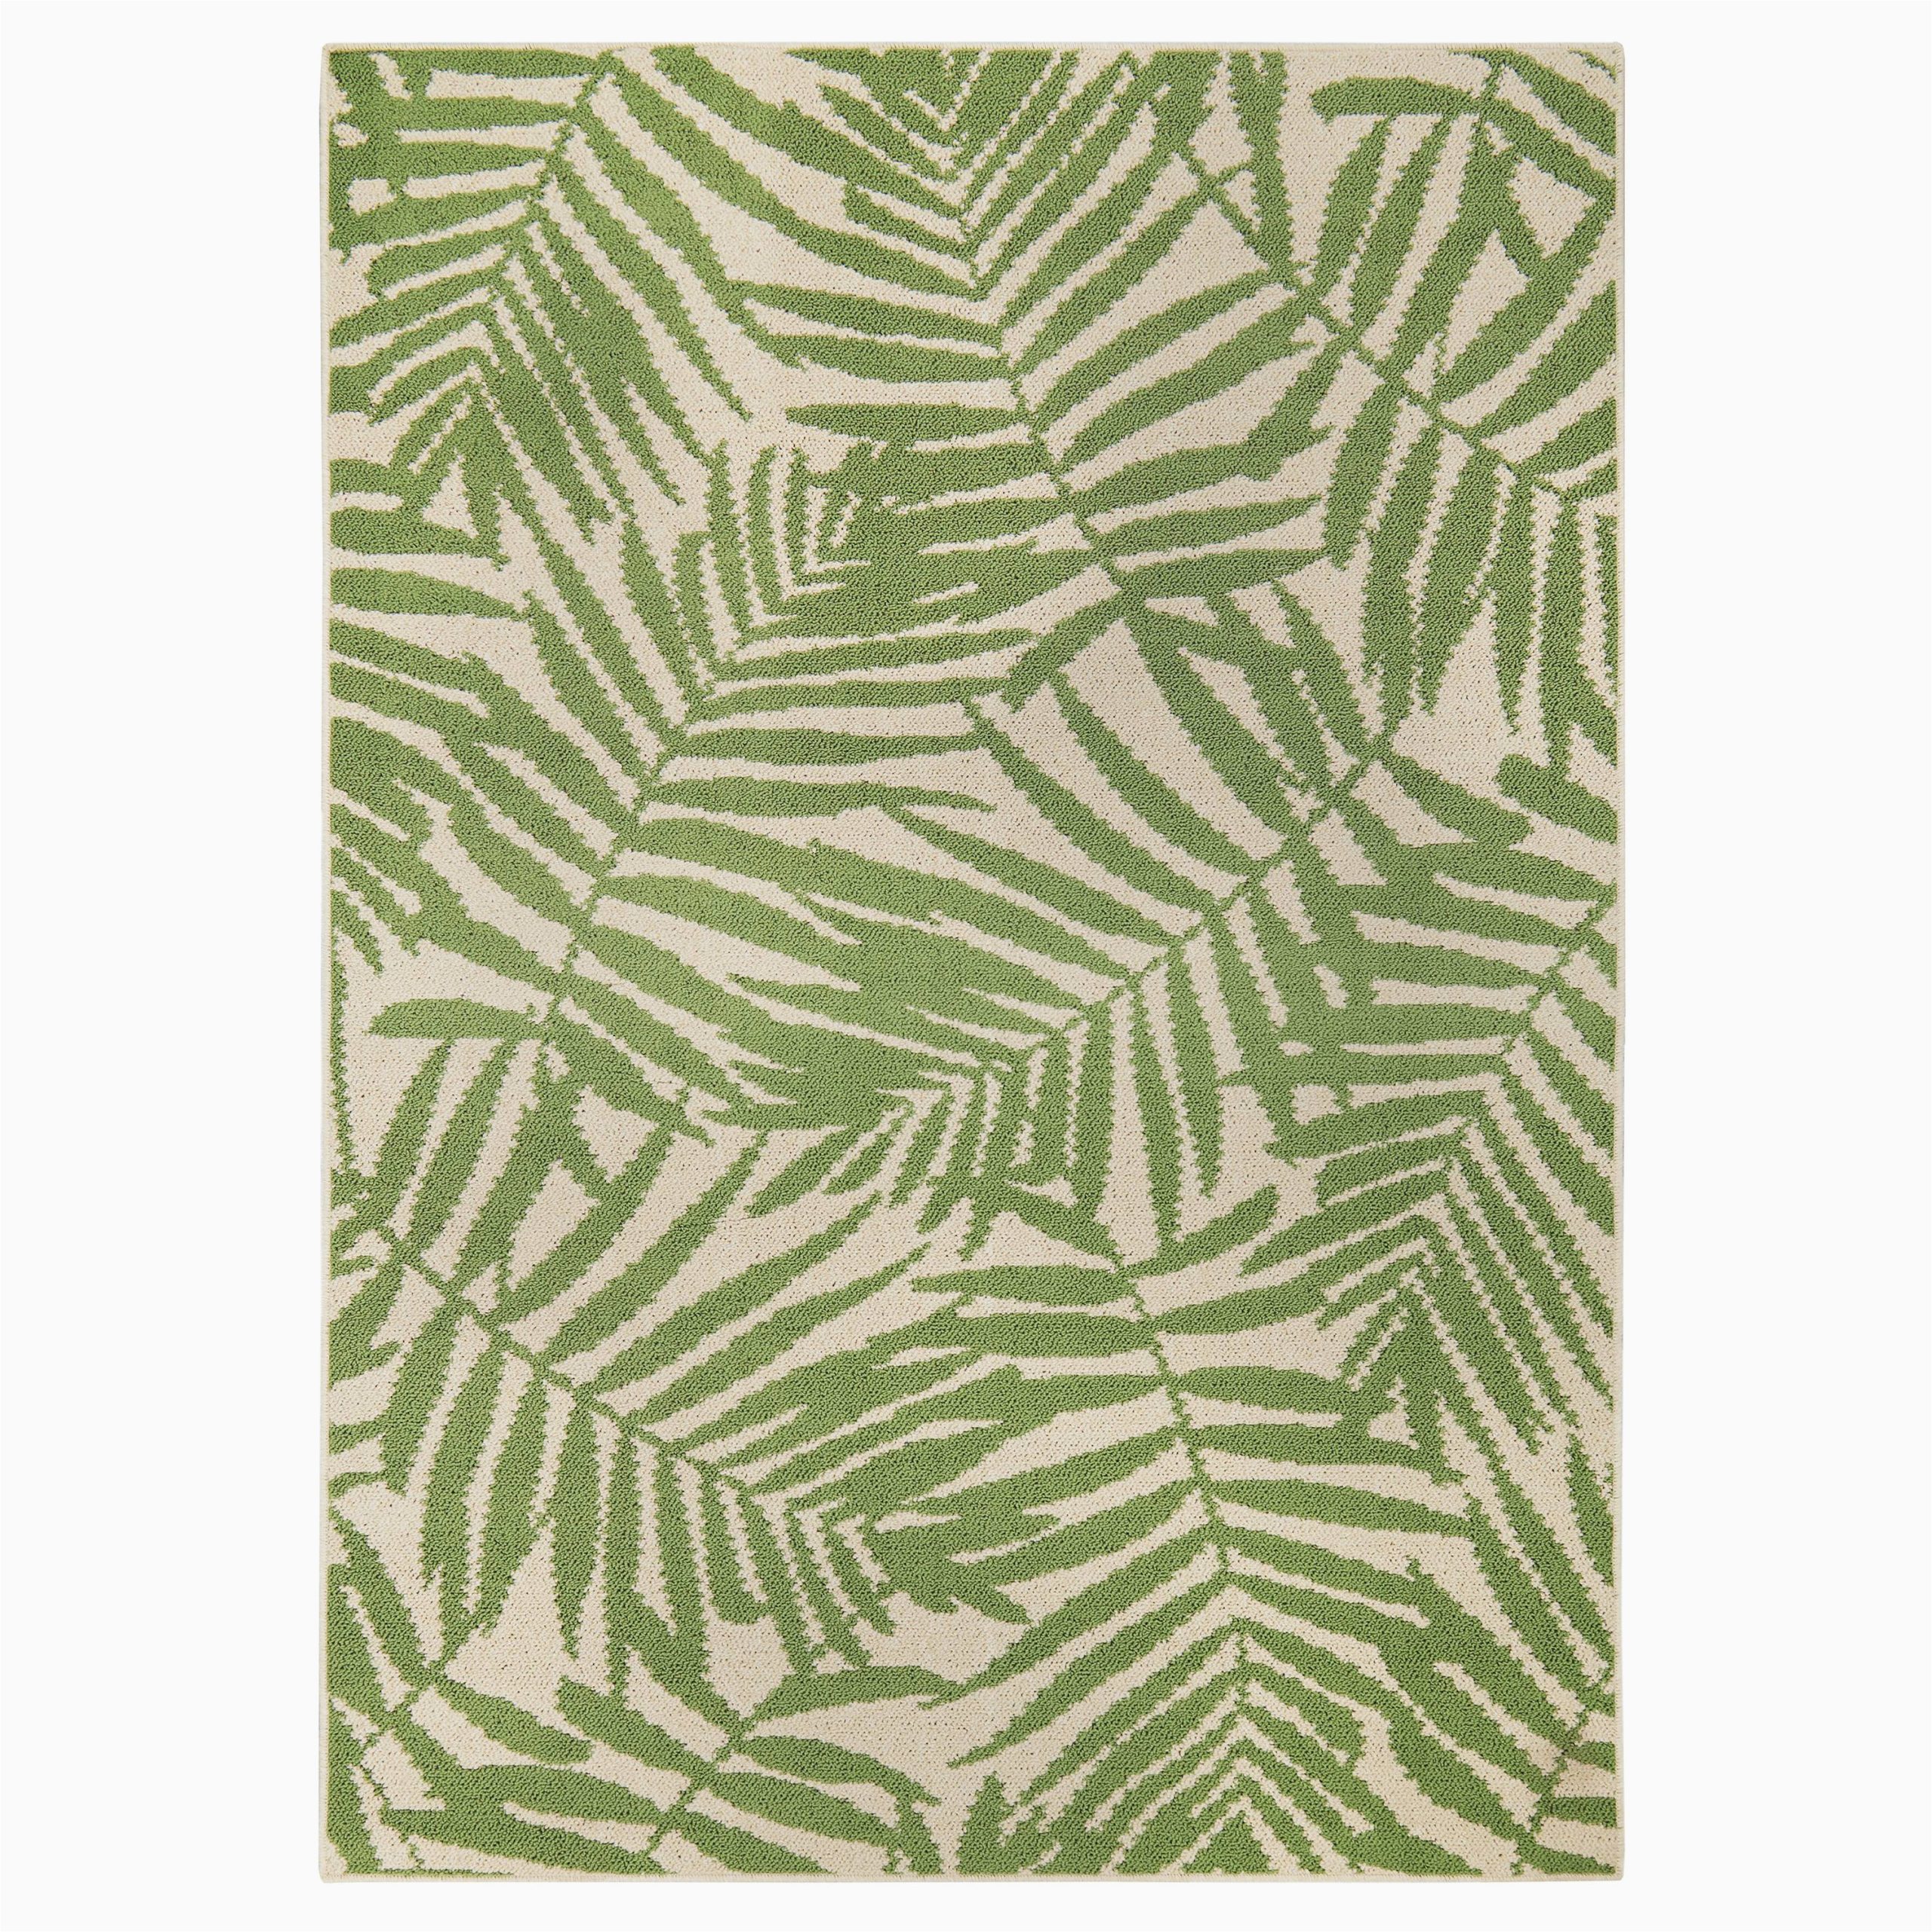 Beige and Green area Rugs 8×10 Mainstays Palms Tufted Floral Outdoor Rug, Green and Beige, 8’x10′